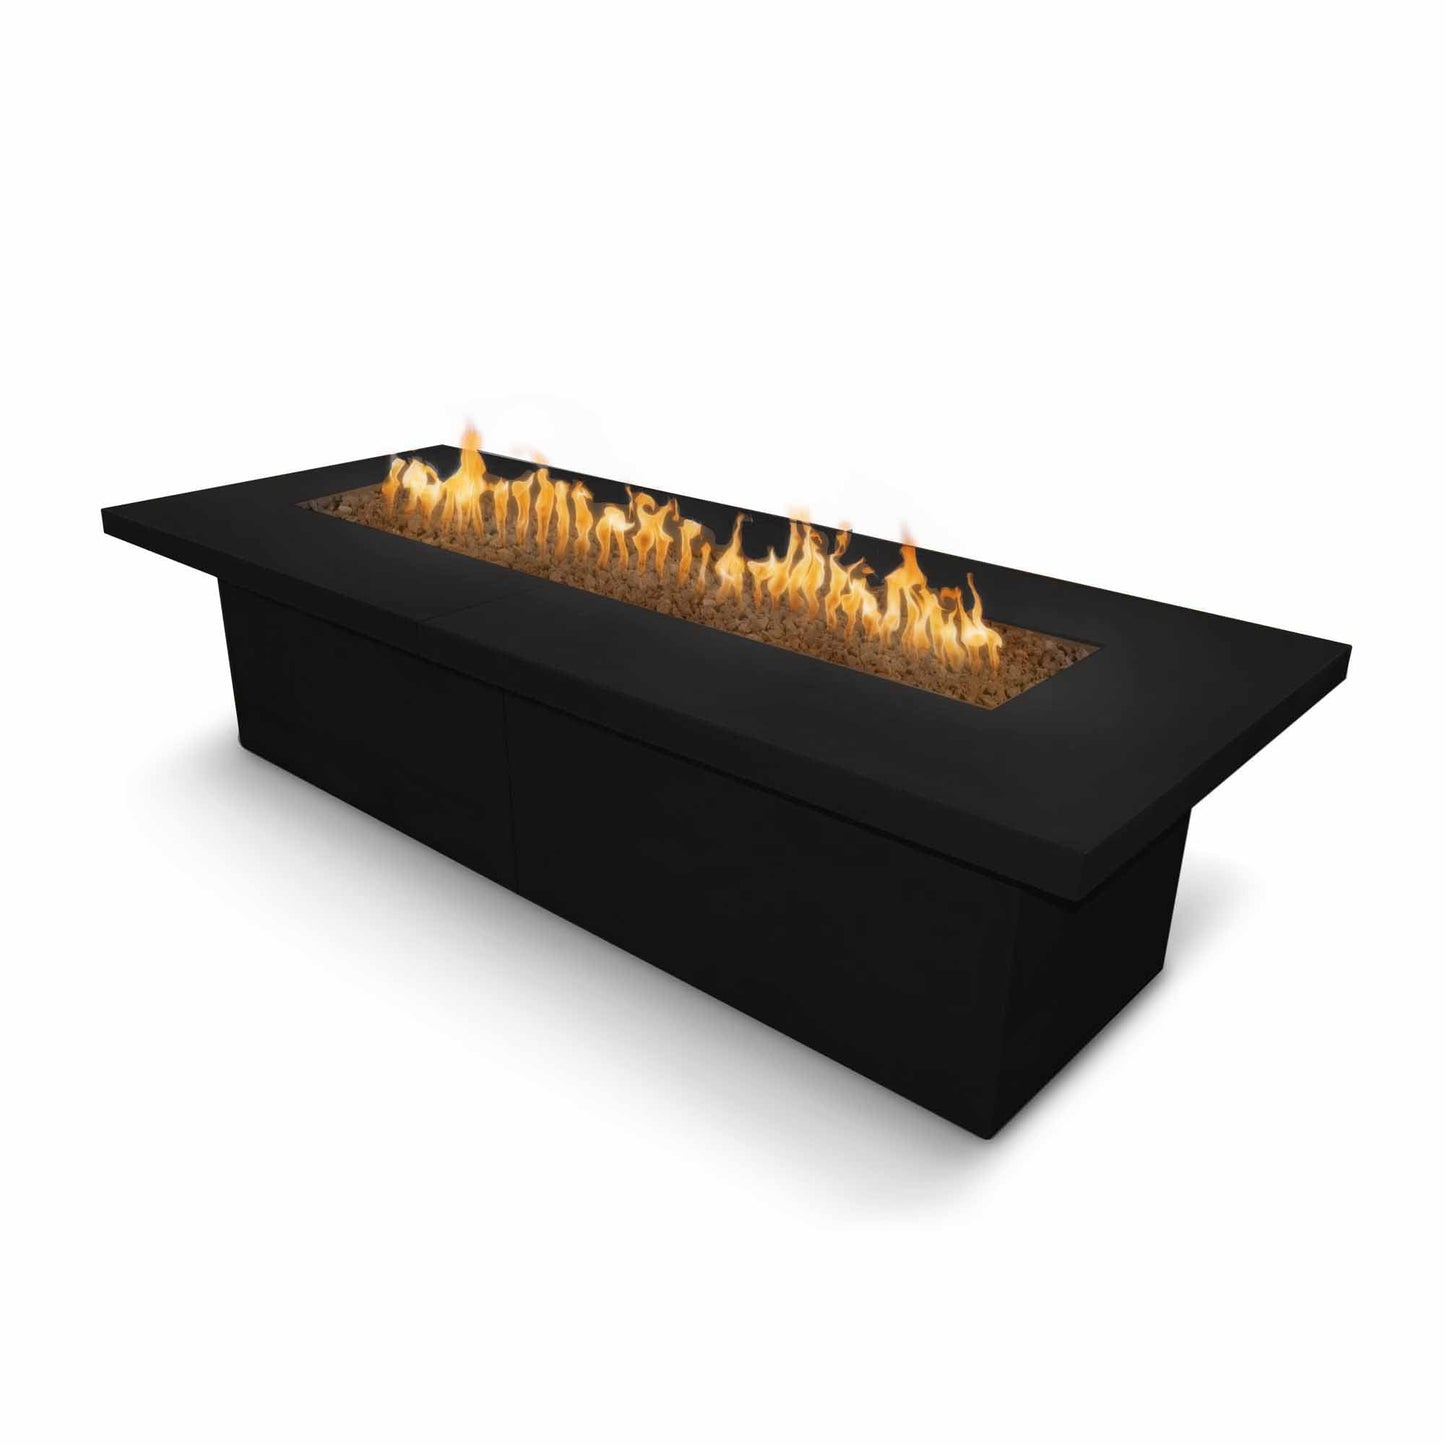 The Outdoor Plus Rectangular Newport 72" Gray Powder Coated Metal Liquid Propane Fire Pit with Match Lit Ignition